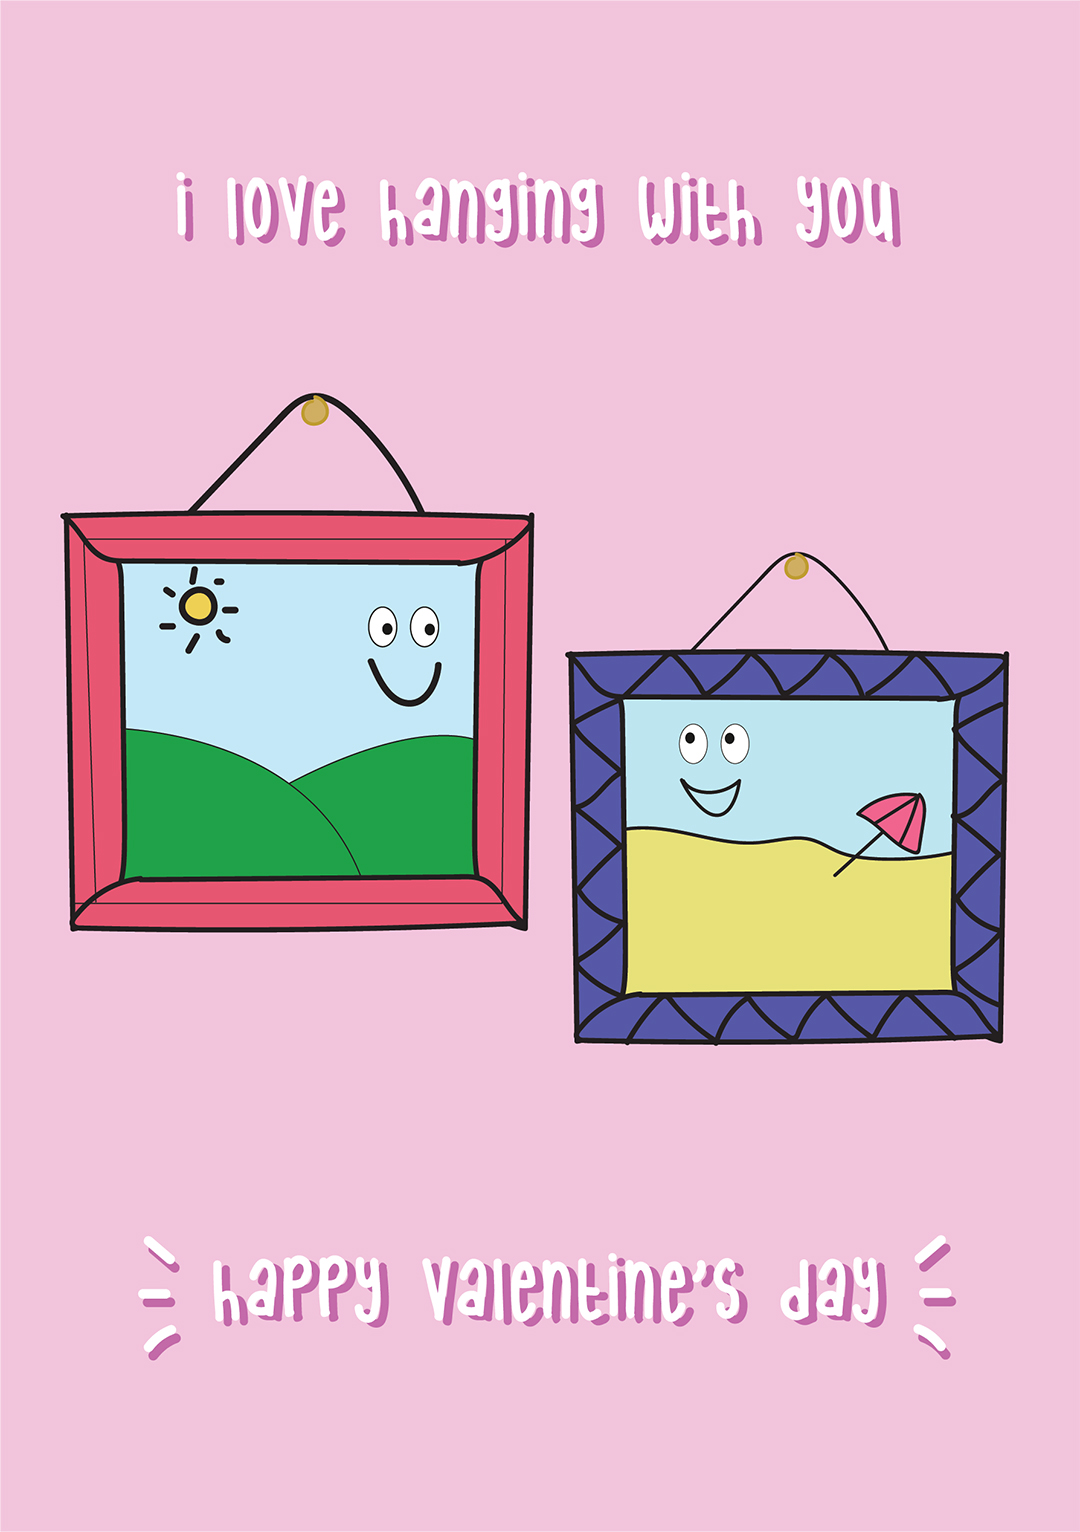 I Love Hanging With You - Valentine's Day Card